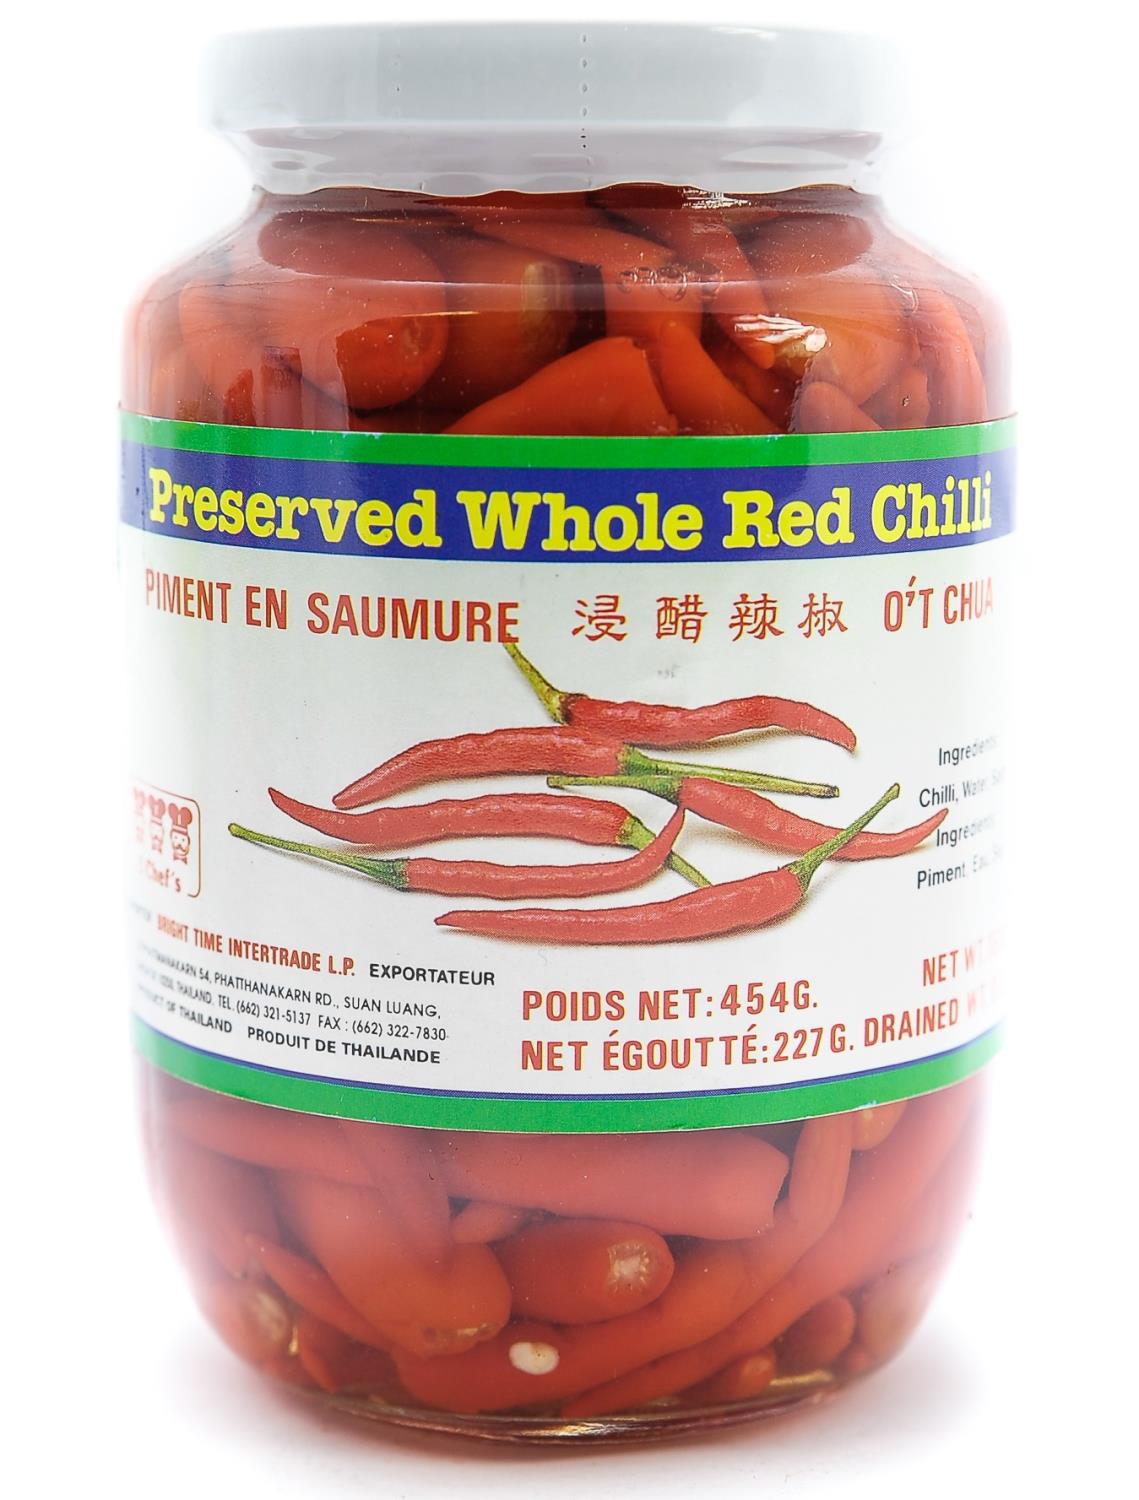 3 CHEF preserved whole red chili 454g TH